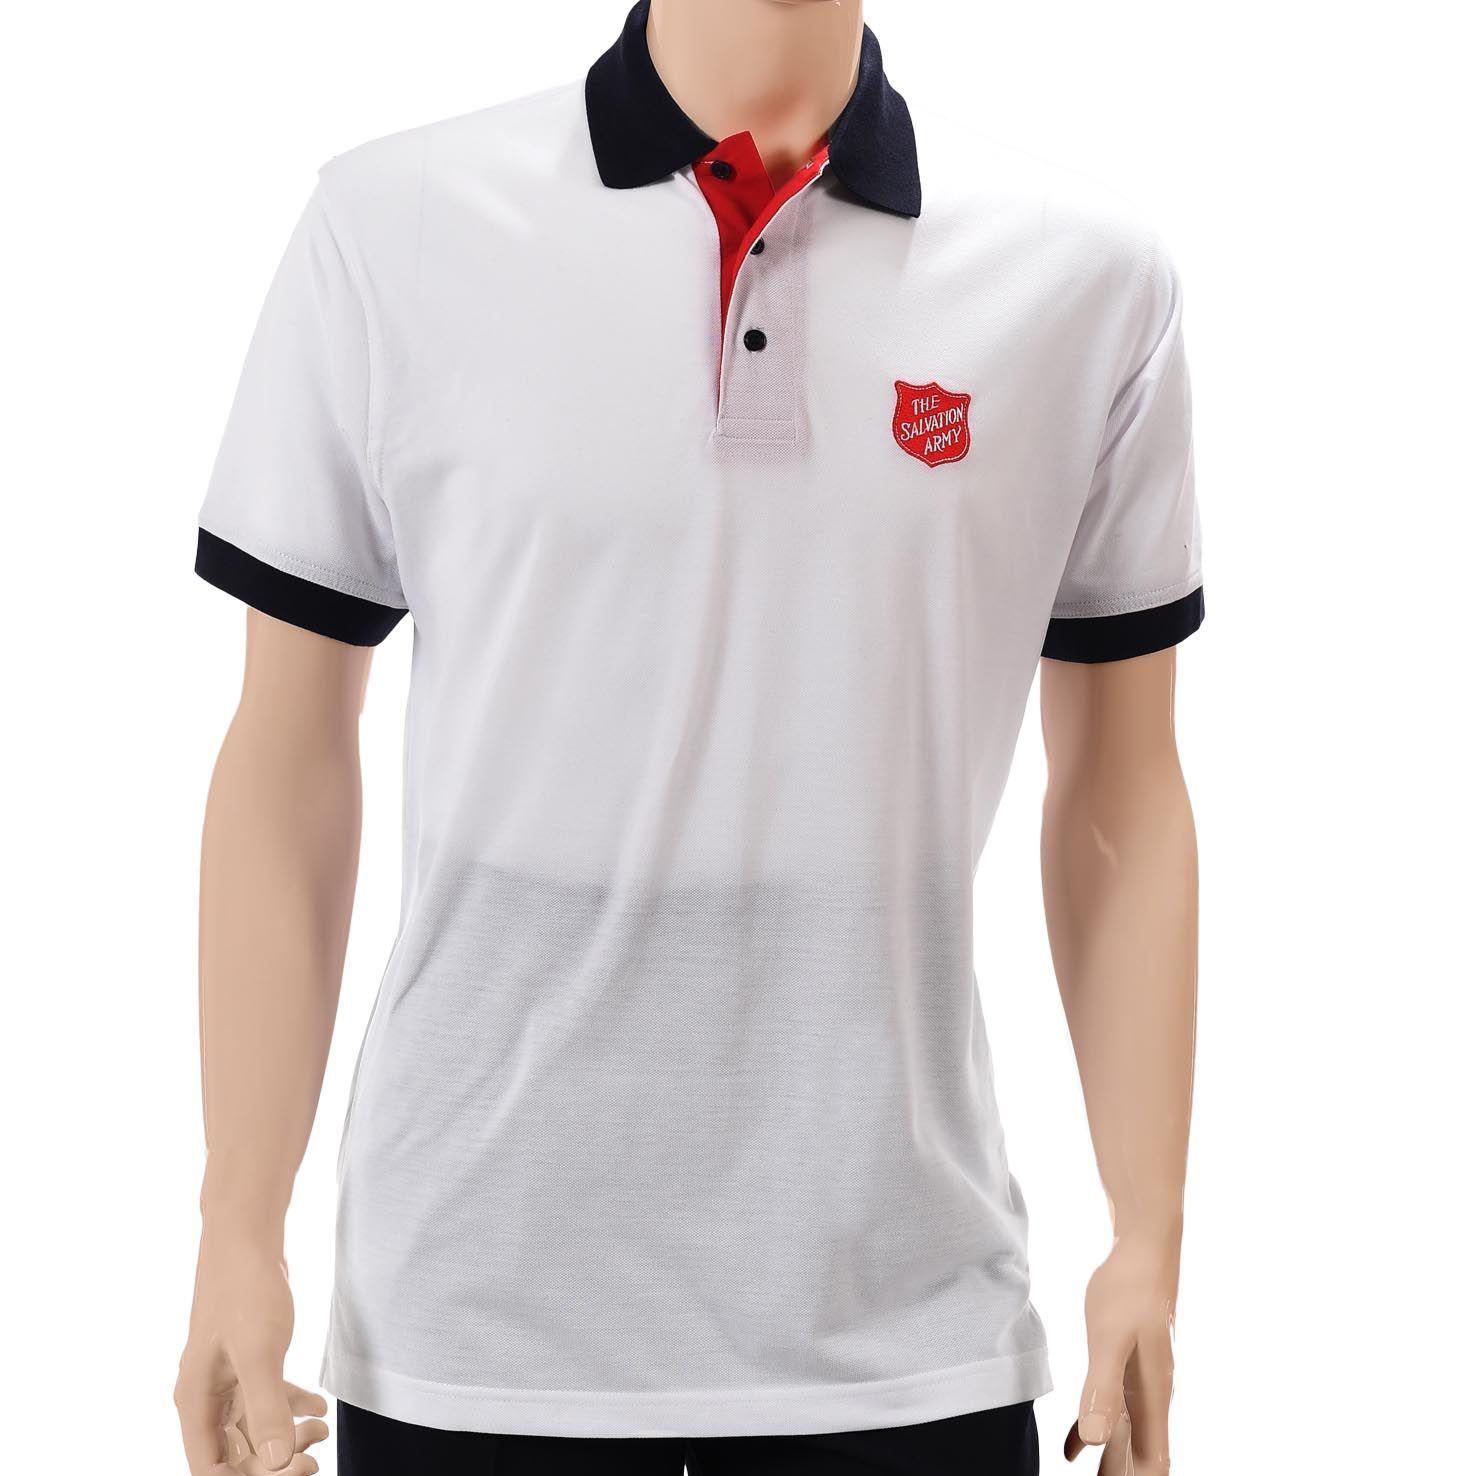 Red Shield Logo - Unisex Polo Shirt White Contrast with Red Shield Logo